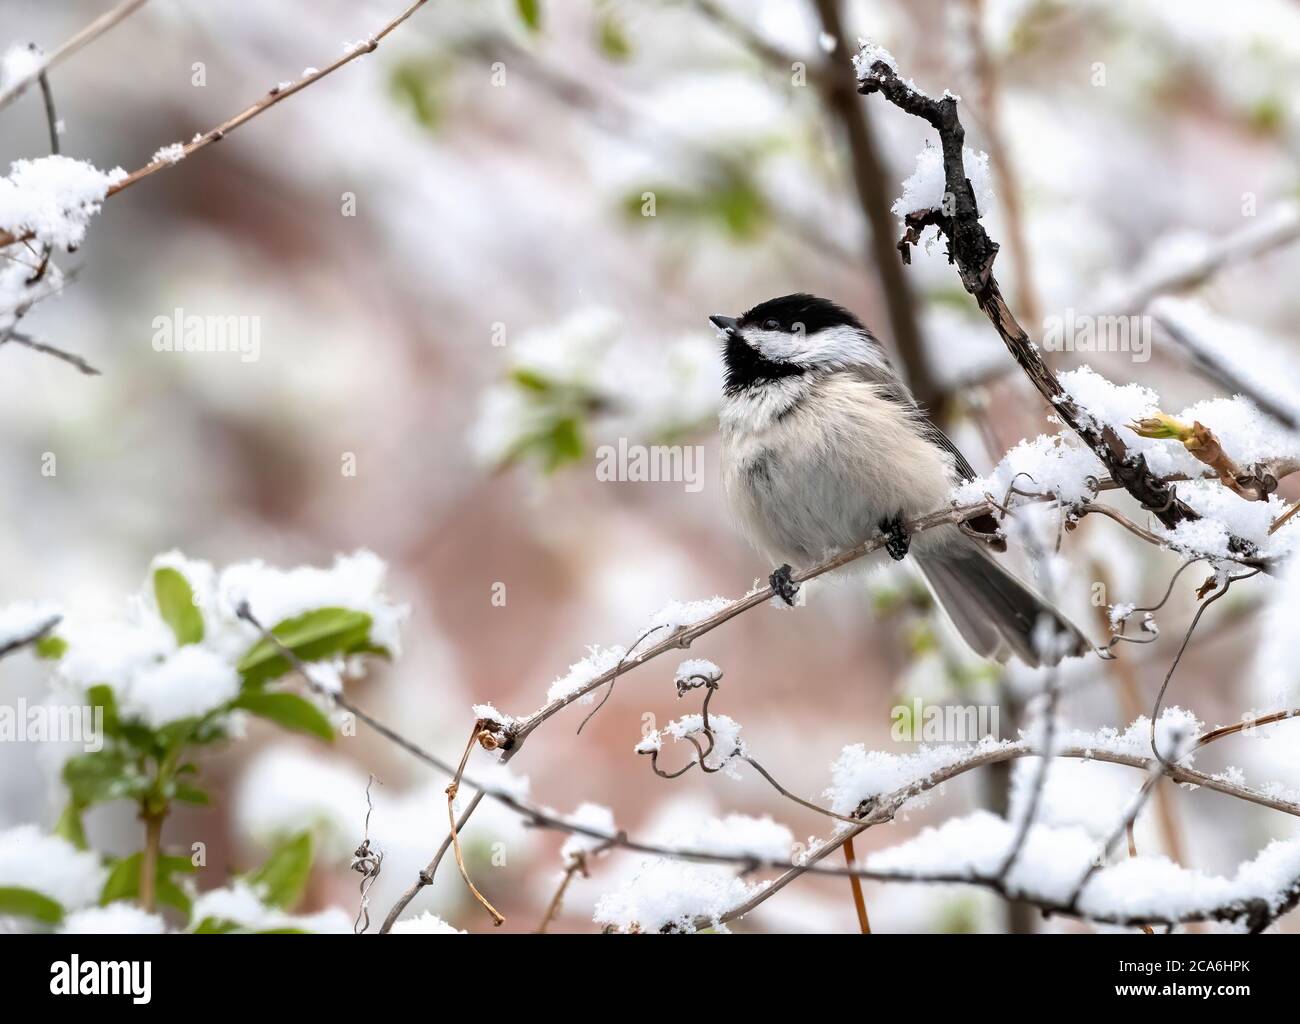 A Black-capped Chickadee with snowflakes on his beak enjoying the freshly fallen snow of a Spring storm. Stock Photo